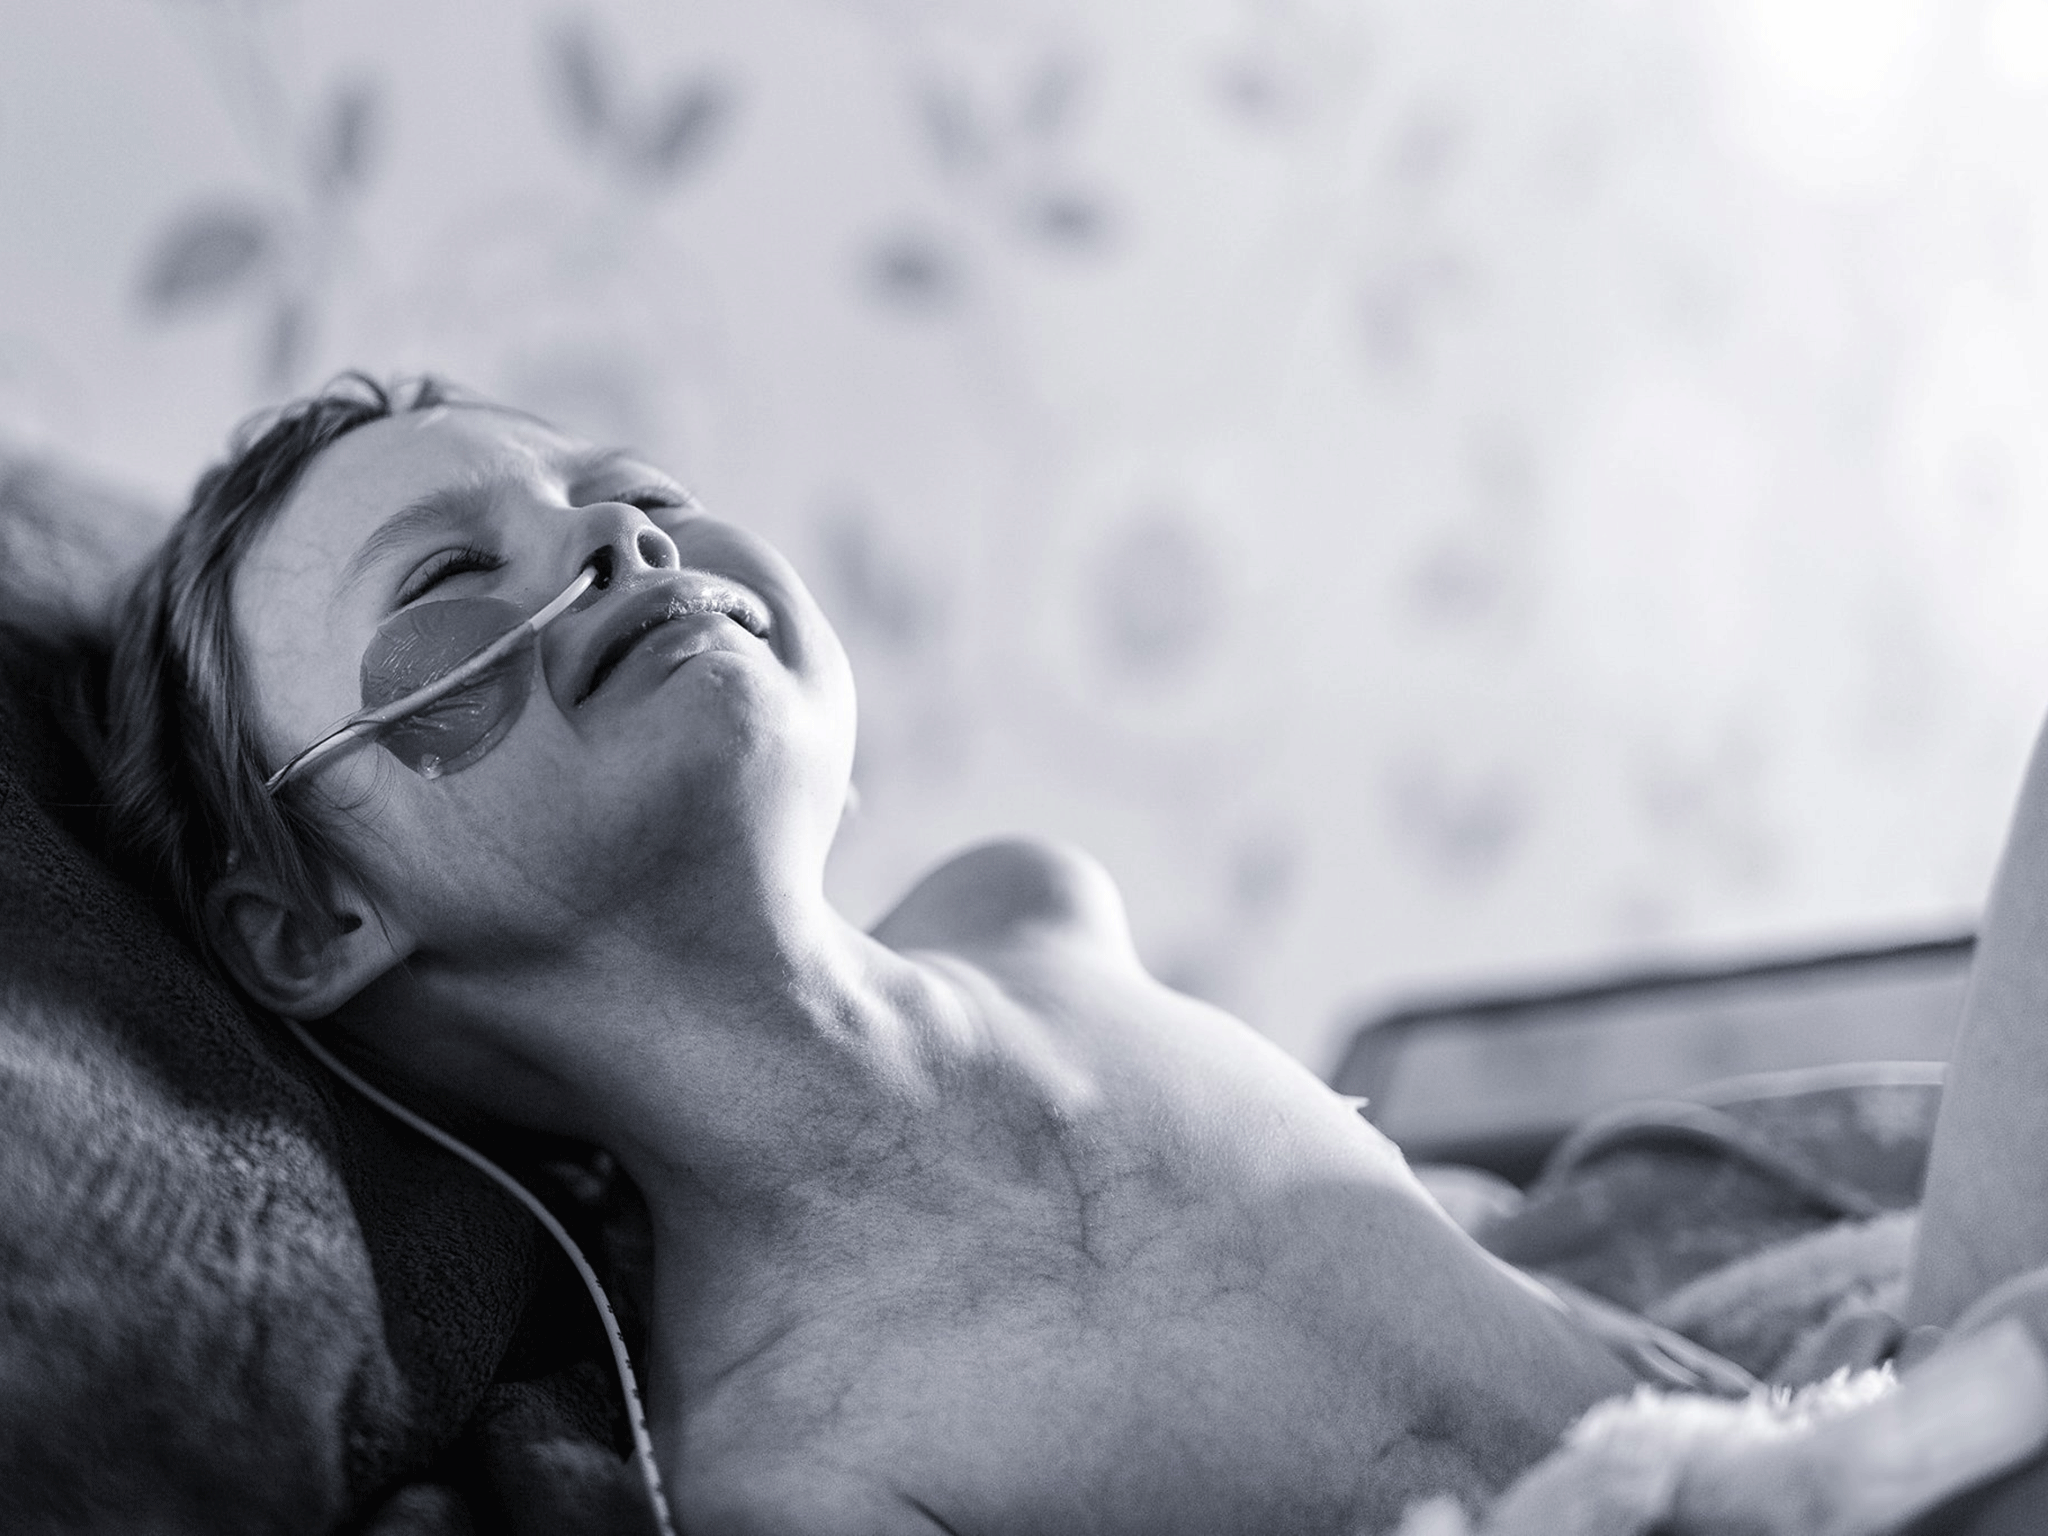 Why a father shared a photo of his 4-year-old dying of cancer